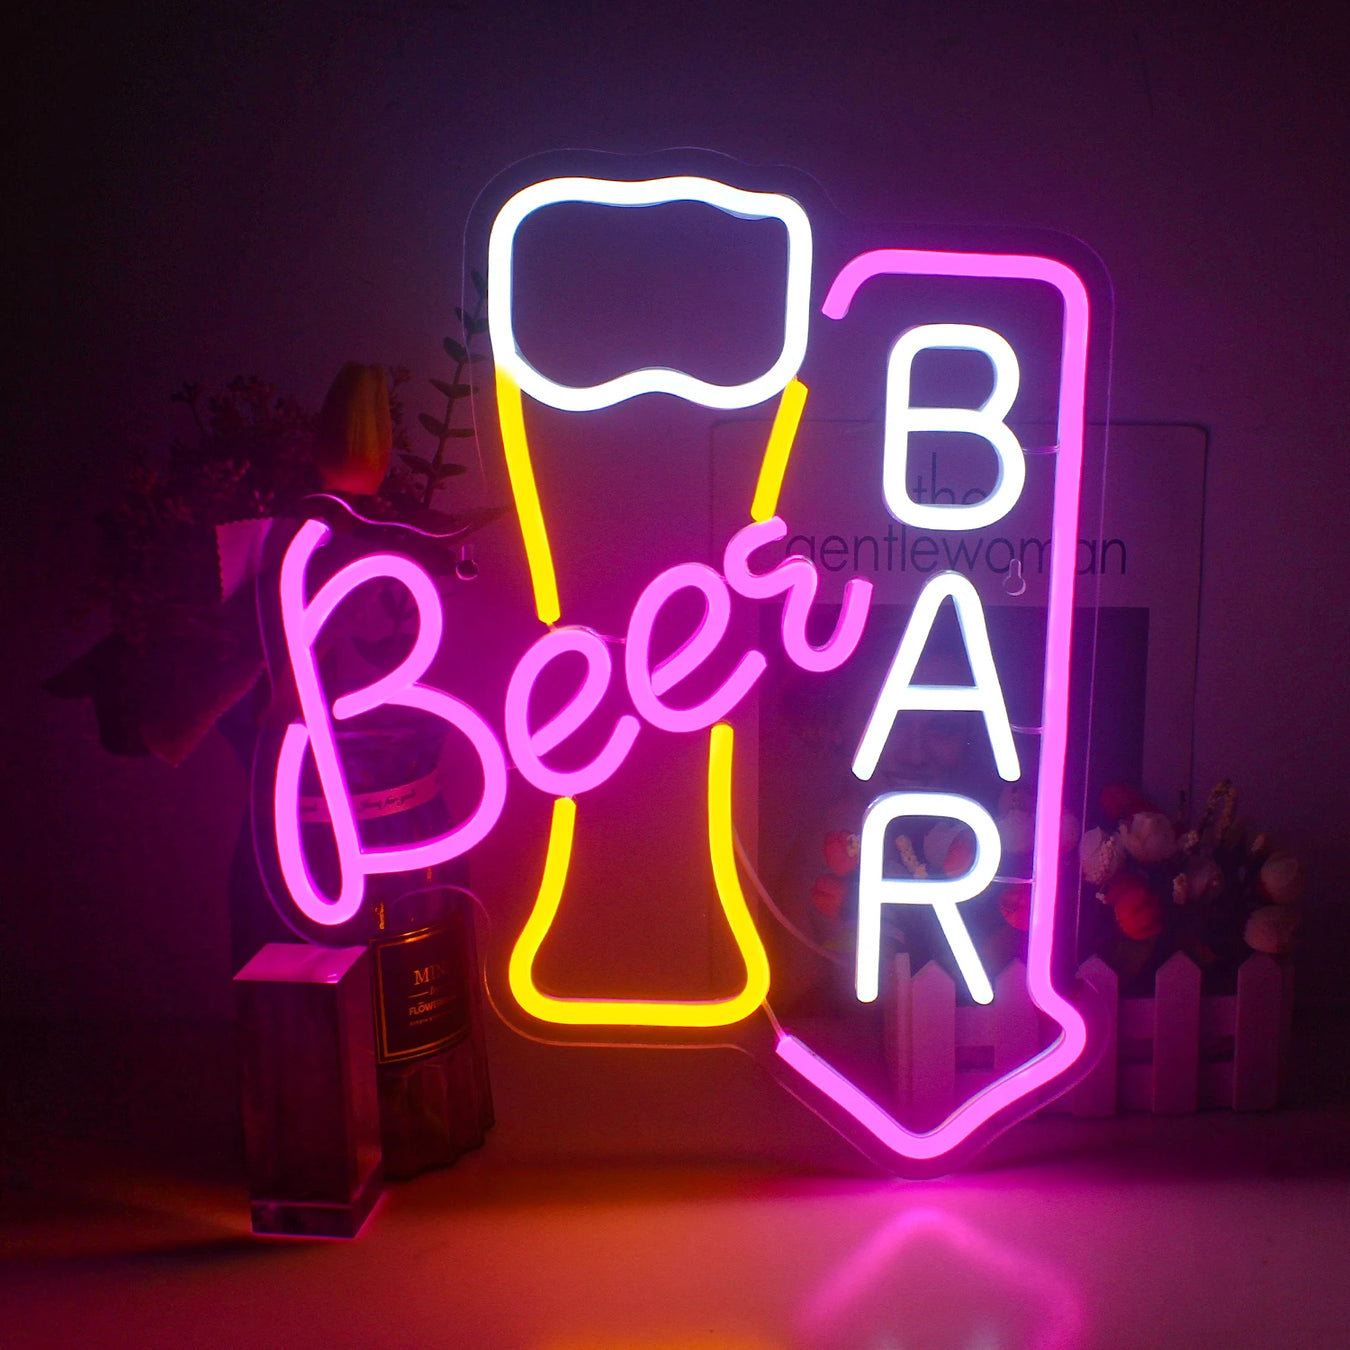 Neon LED Wall Sign: Stylish Light for Home Decor and Events